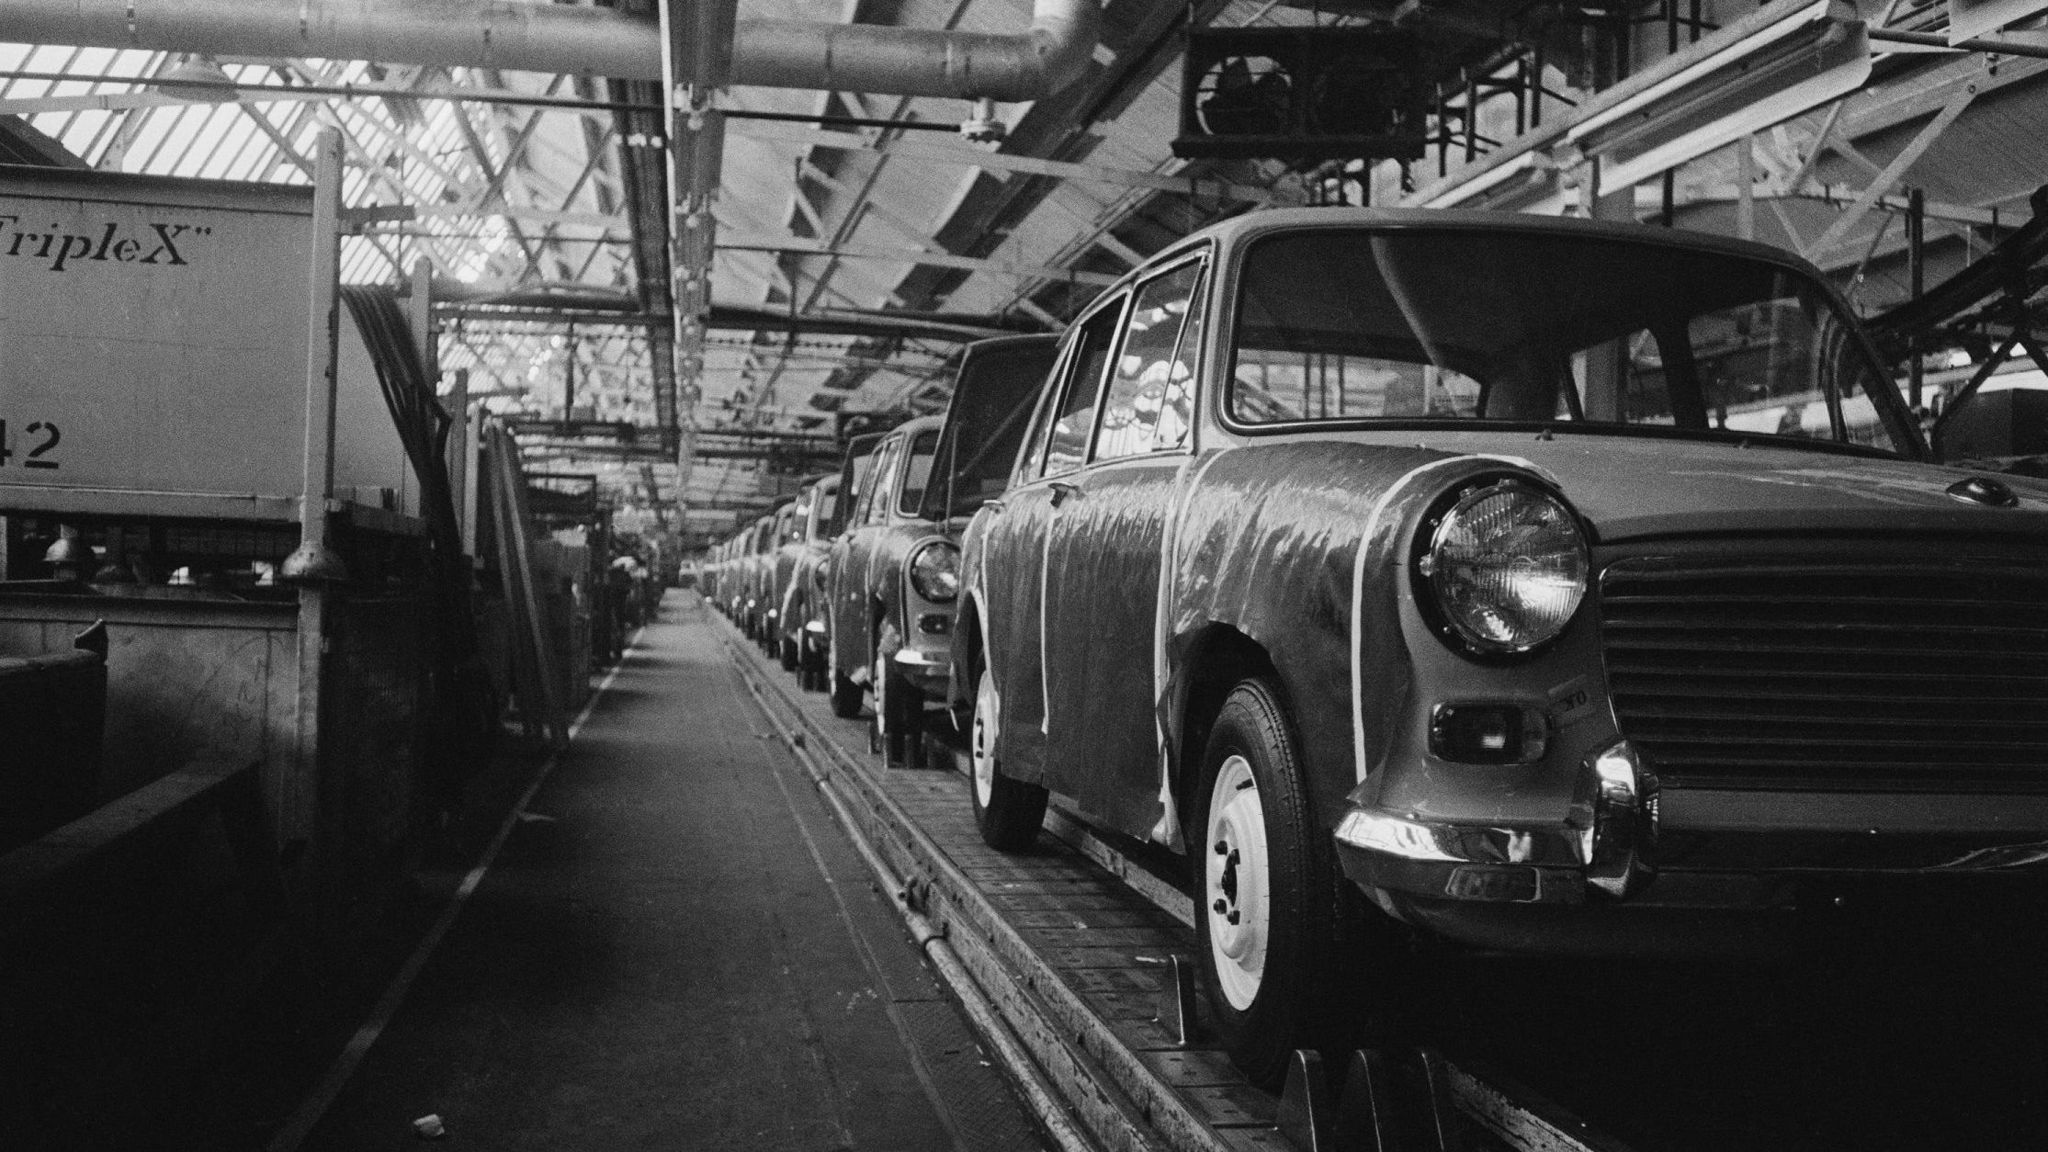 A black and white picture of the production line at Cowley in 1965, with nearly finished cars waiting to roll off it